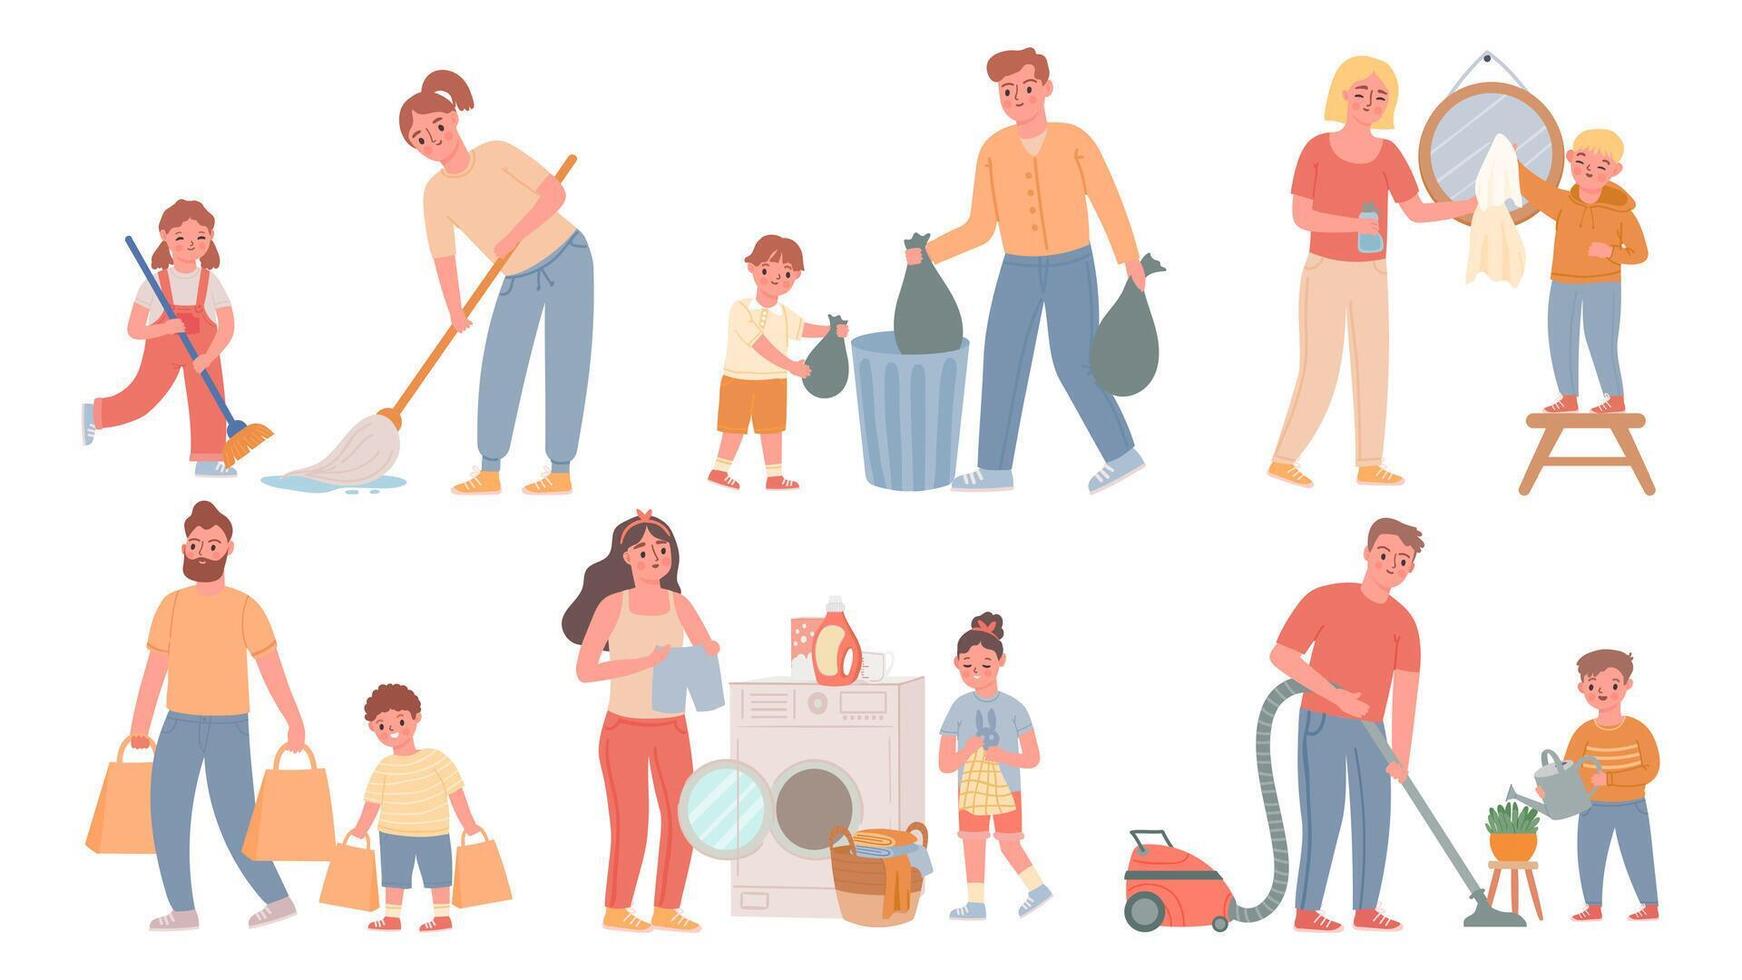 Kids and parents cleaning. Children helps adults with housework, sweeping, do laundry, throw out garbage. Cartoon family chores vector set